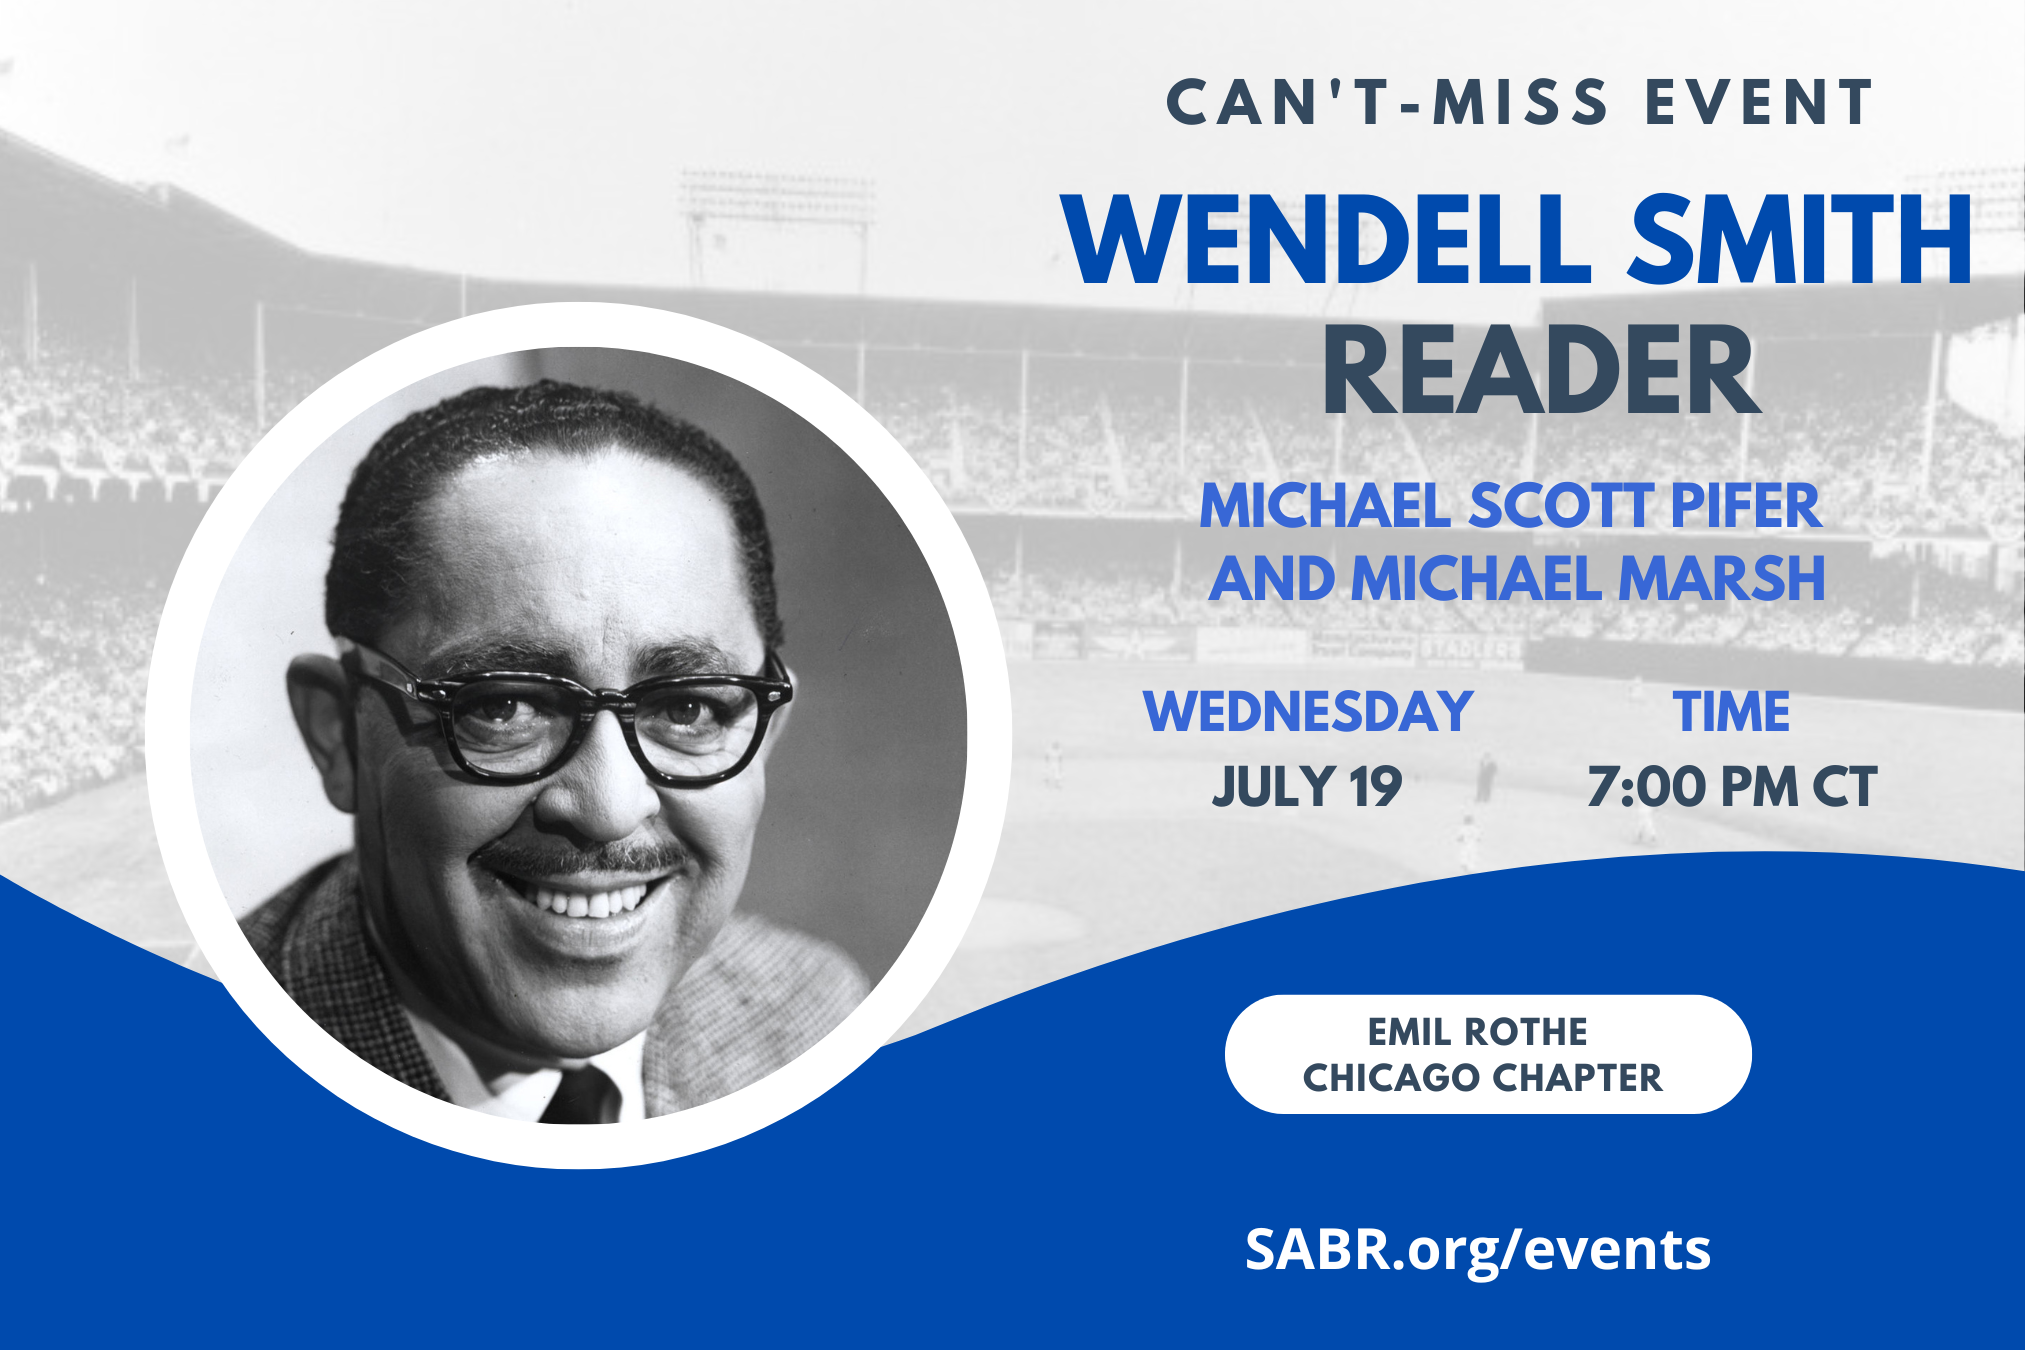 The Wendell Smith Reader: Selected Writings on Sports, Civil Rights and Black History with editor Michael Scott Pifer and contributor Michael Marsh
 
Wednesday, July 19, 2023 – 7:00 p.m. (CT)
Zoom Meeting – Registration Required
 
Join SABR's Emil Rothe Chicago Chapter for a discussion of the life and work of famed Chicago sportswriter Wendell Smith, with editor Michael Scott Pifer and Chicago SABR’s very own, Michael Marsh. Their book, The Wendell Smith Reader, has been hailed by the Chicago Tribune as a “splendid and important book.”